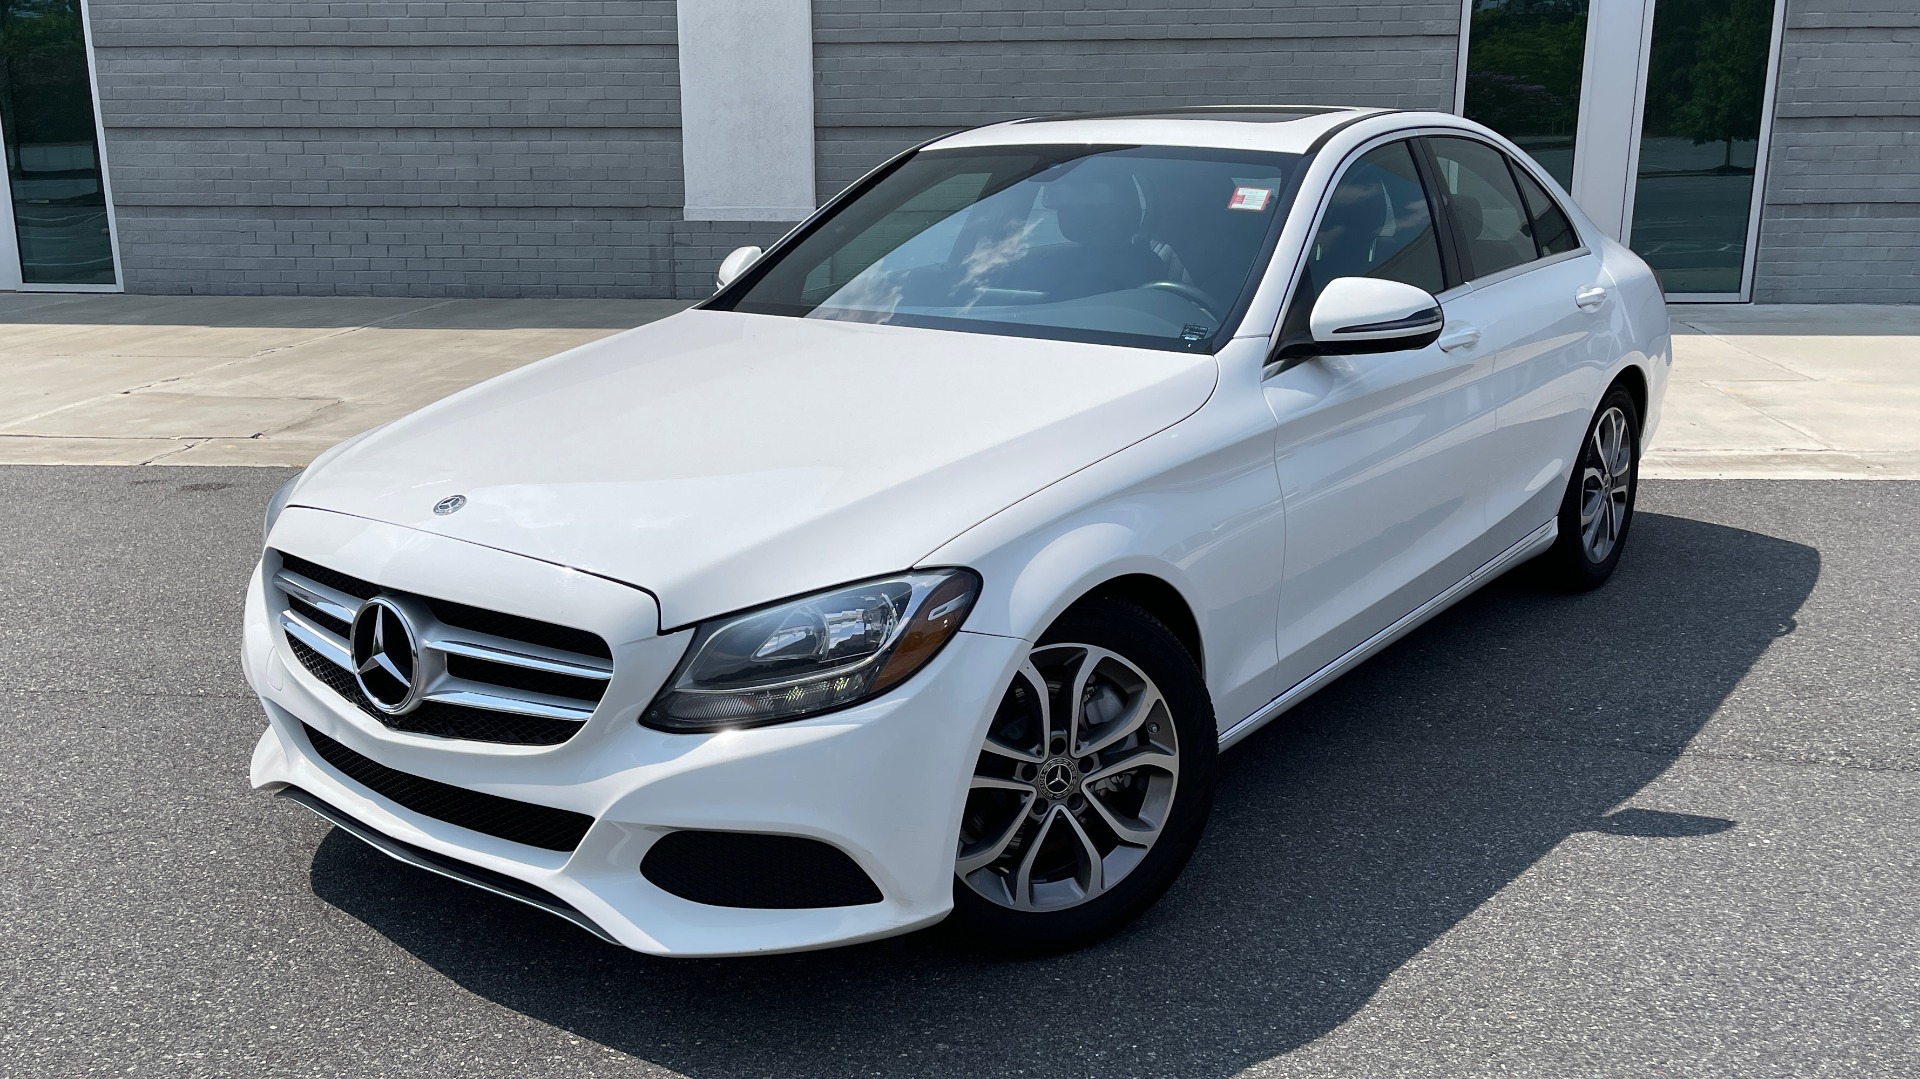 Used 2018 Mercedes-Benz C-CLASS C 300 / 2.0L / RWD / SUNROOF / APPLE~ANDROID / REARVIEW for sale Sold at Formula Imports in Charlotte NC 28227 1